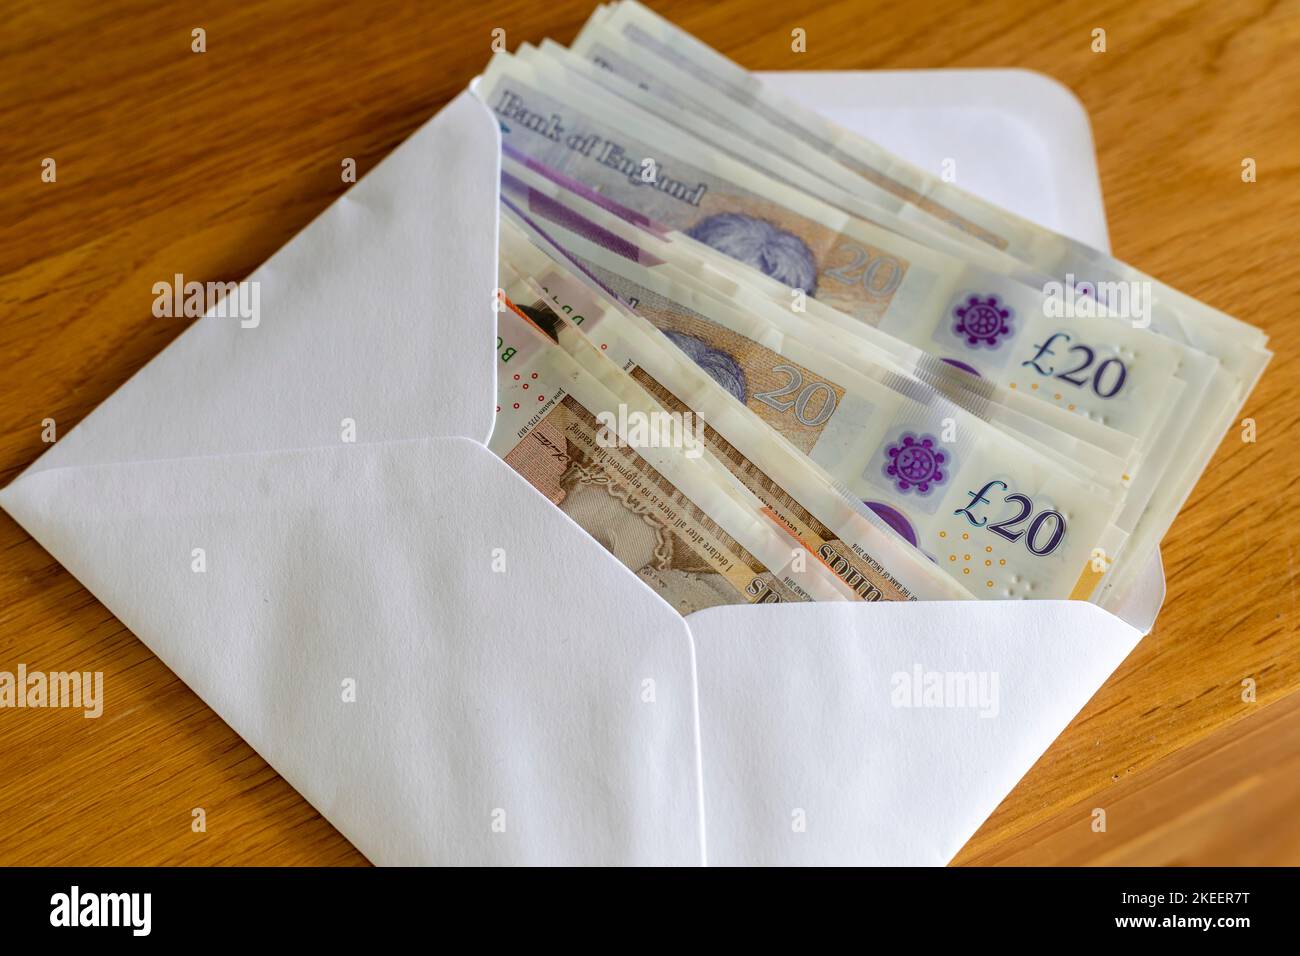 An envelope full of British £20 and £10 pound notes Stock Photo